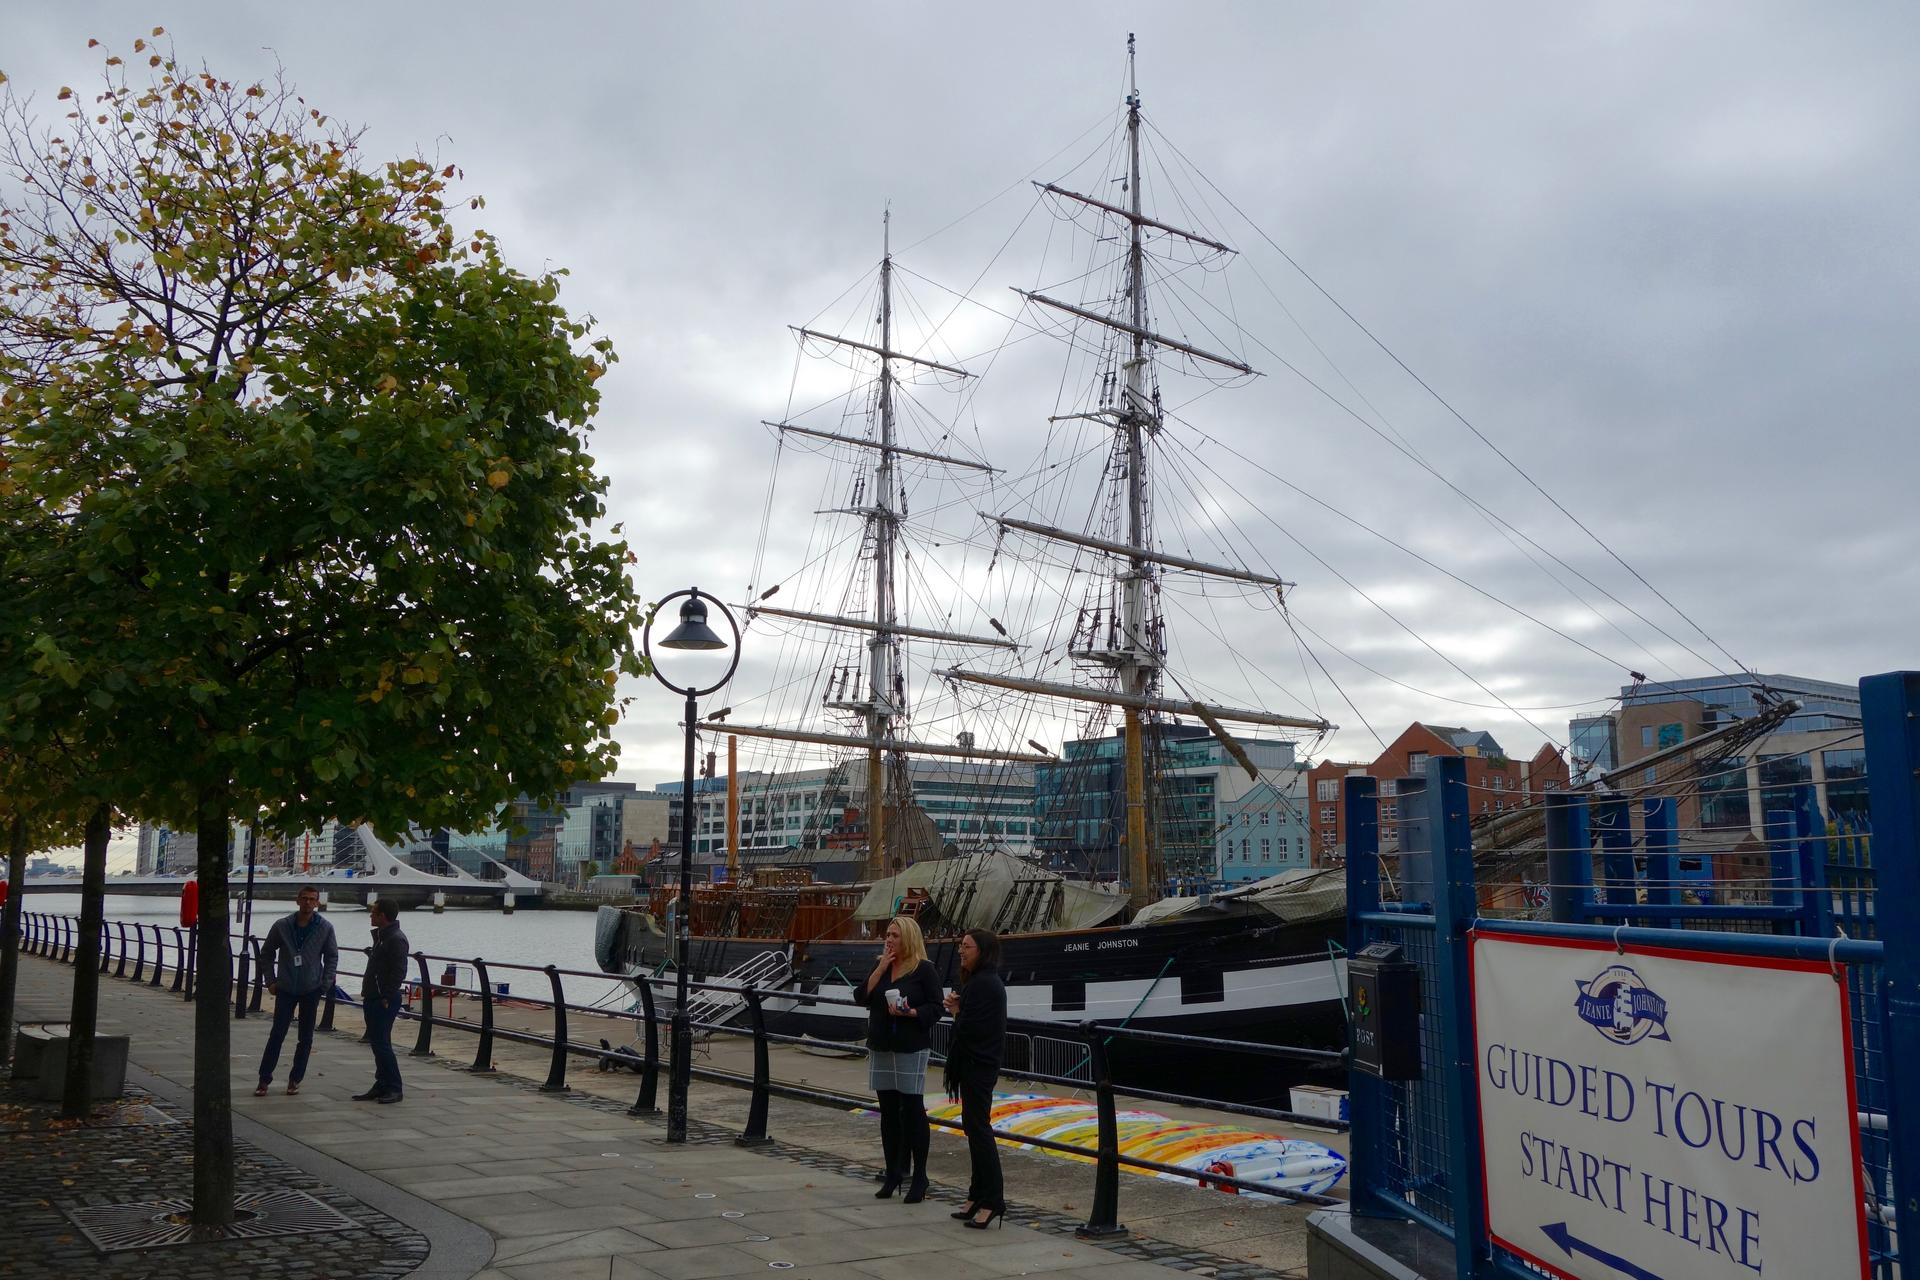 This ship, the Jeanie Johnston is a replica of a ship that took Irish famine survivors in the mid-19th century to the US and Canada